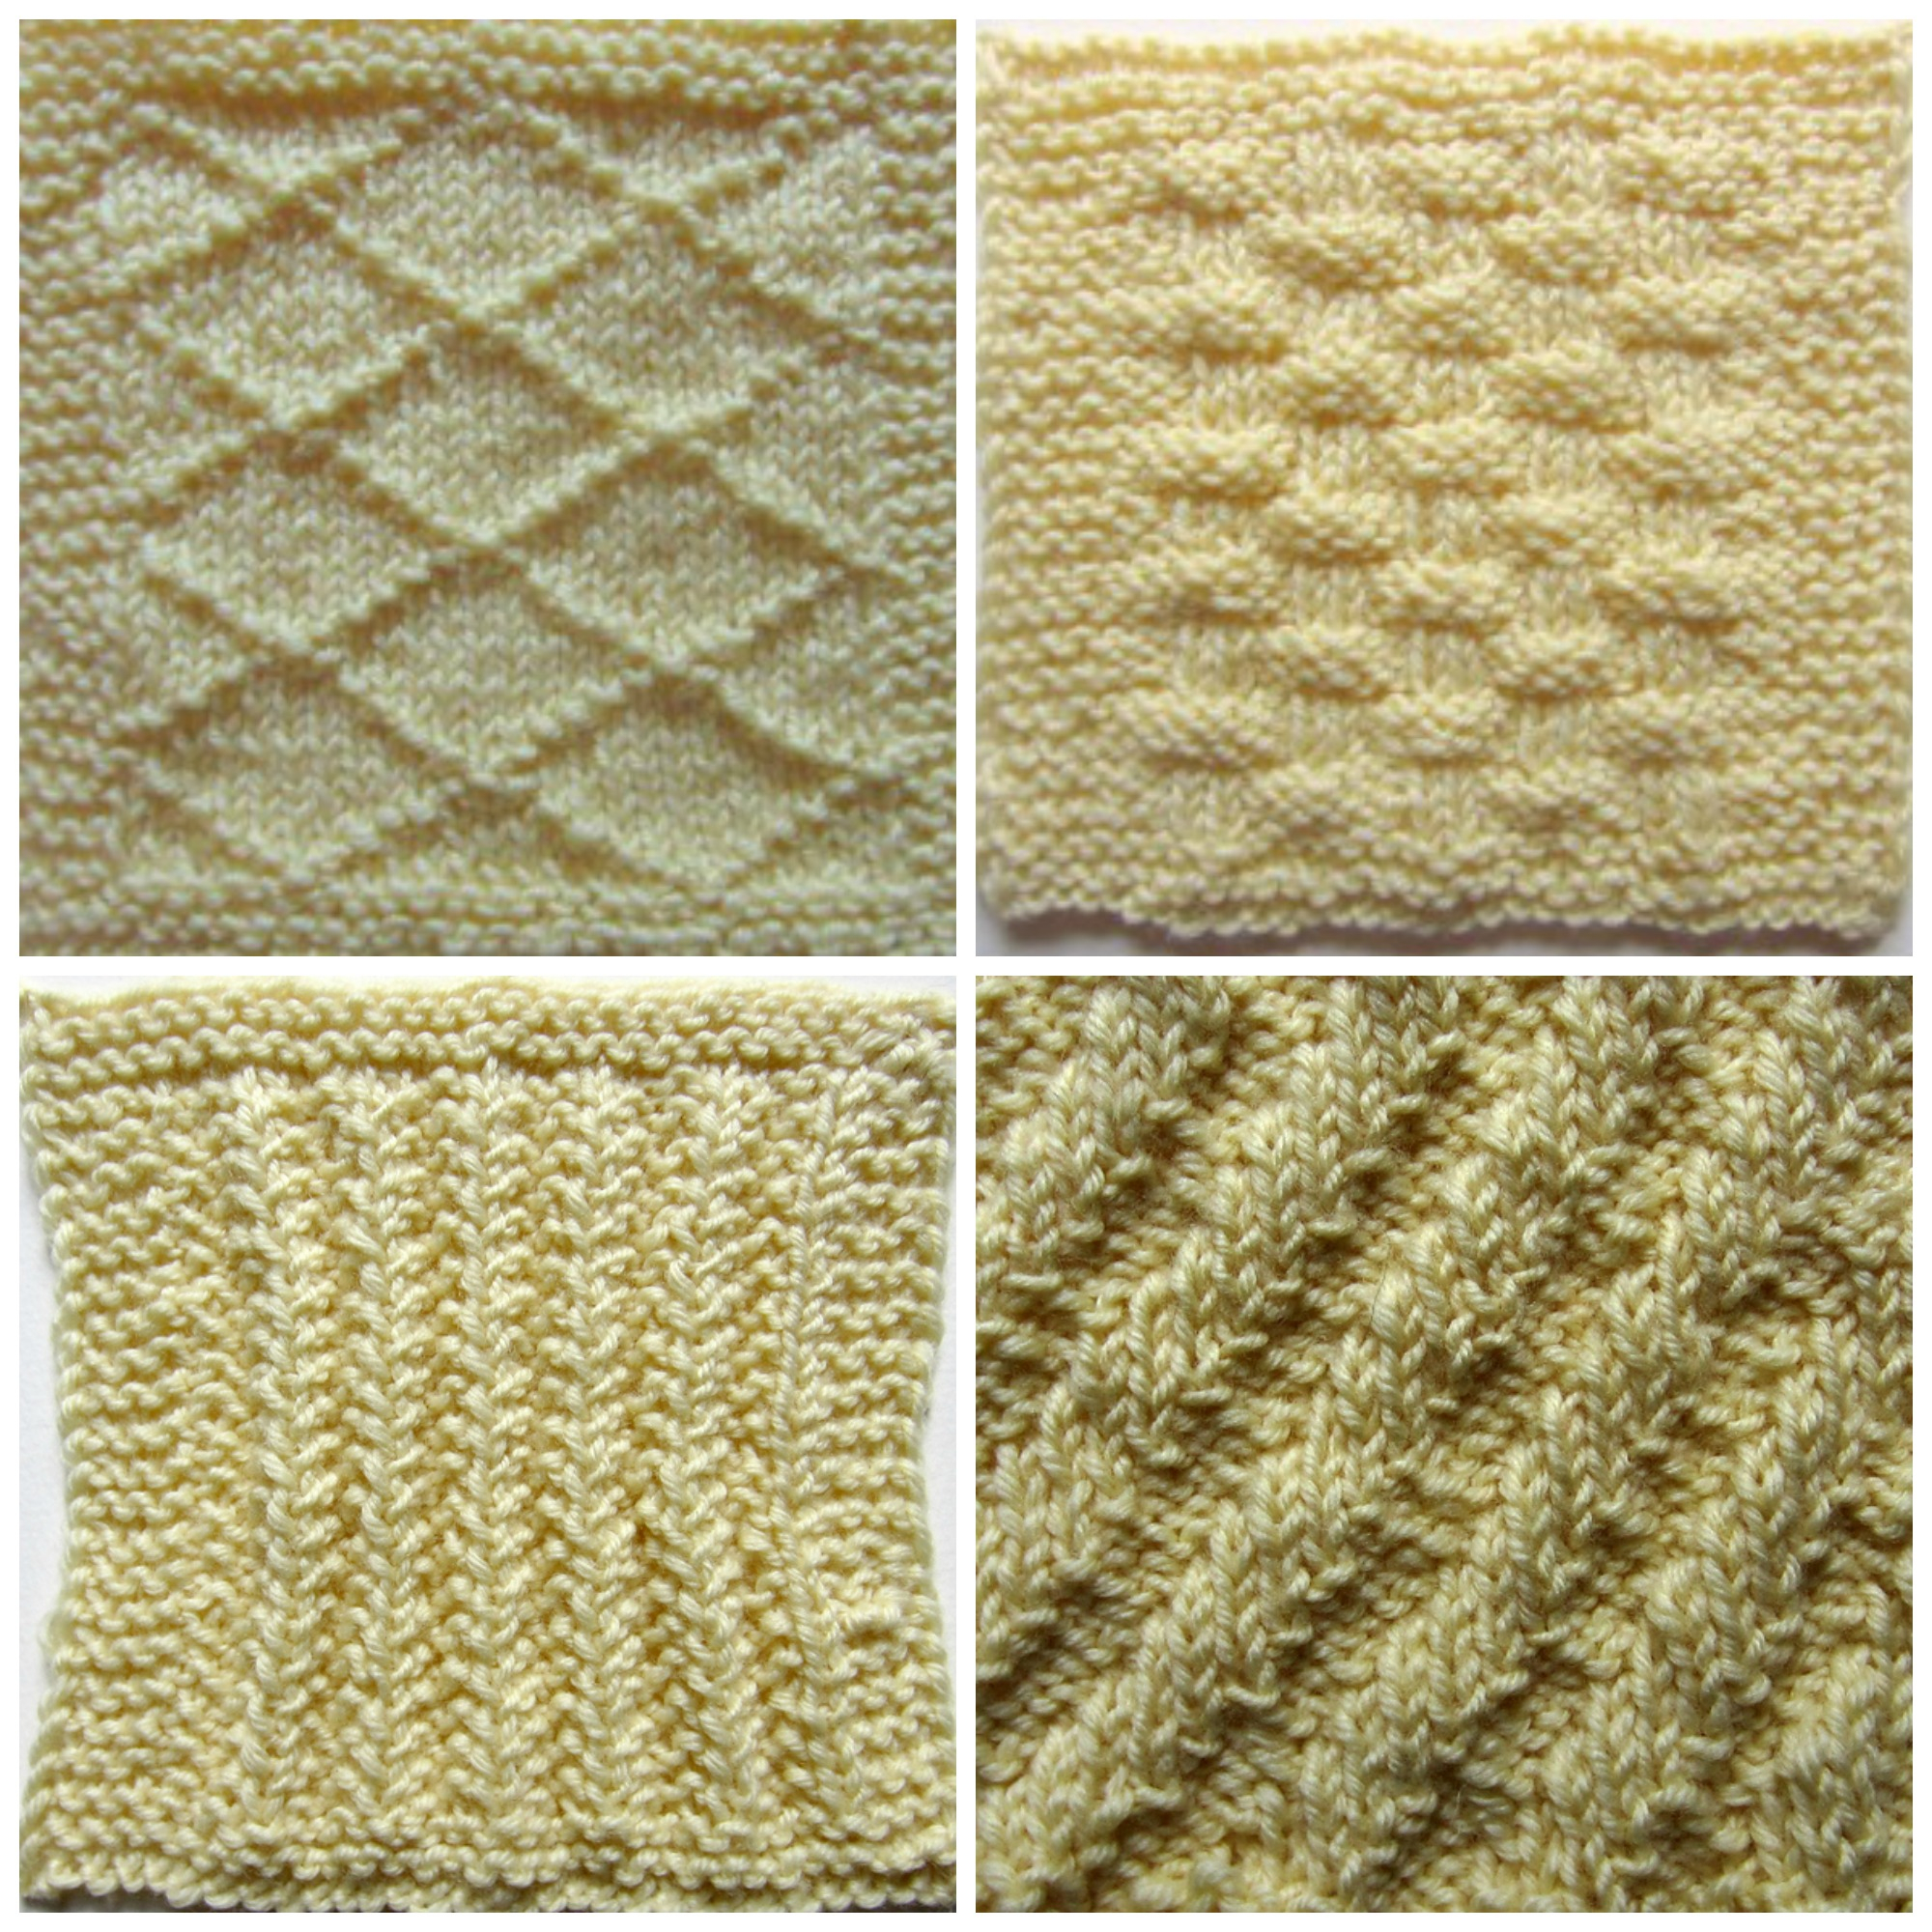 Knitted Squares Patterns Free Knitting Sampler Pillow Part 5 Assembly And Finishing Stitch And